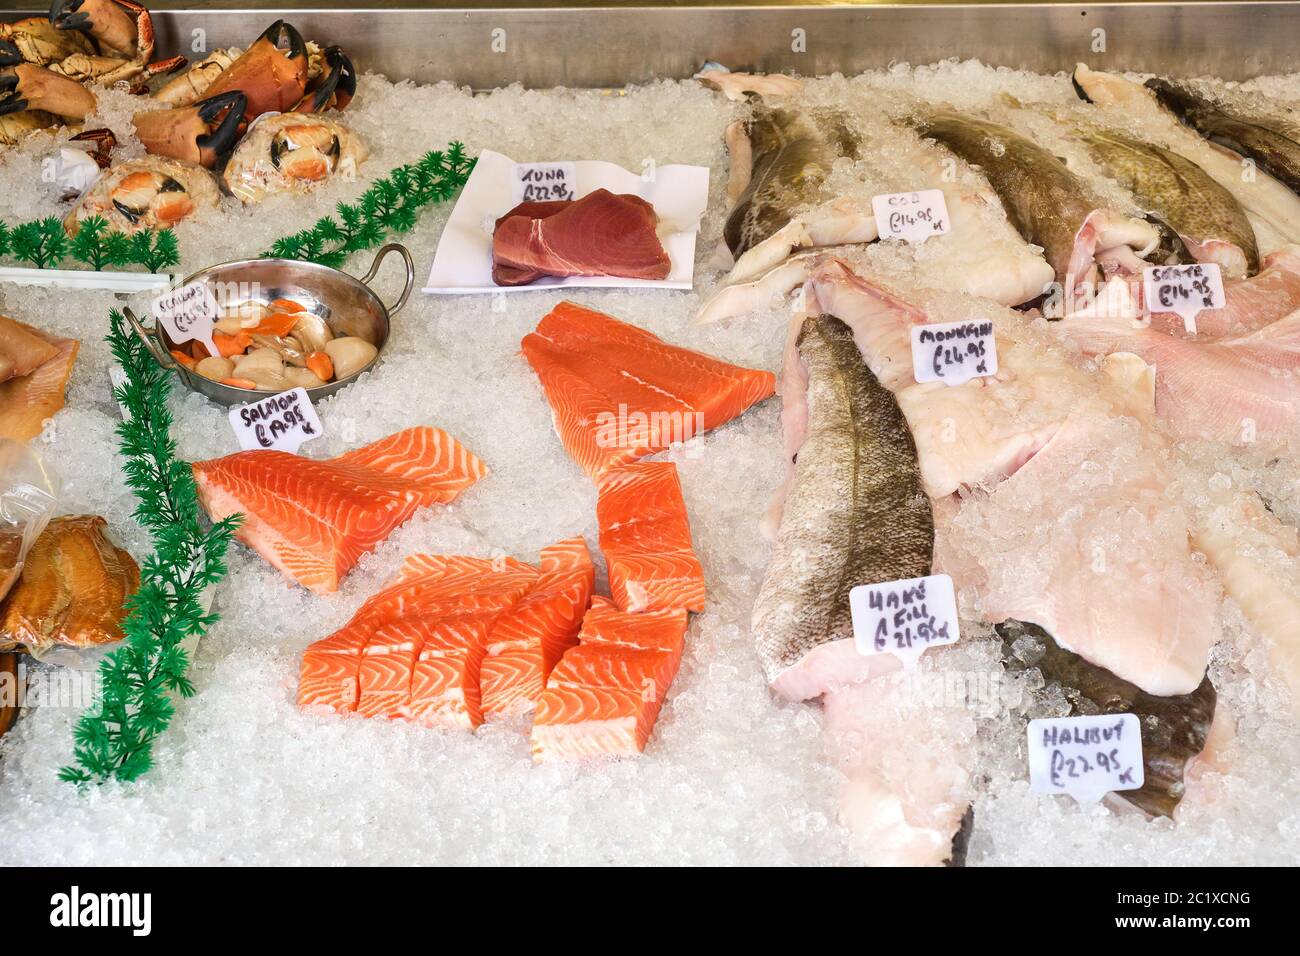 Fresh salmon fillet and other fish and seafood for sale at a market Stock Photo